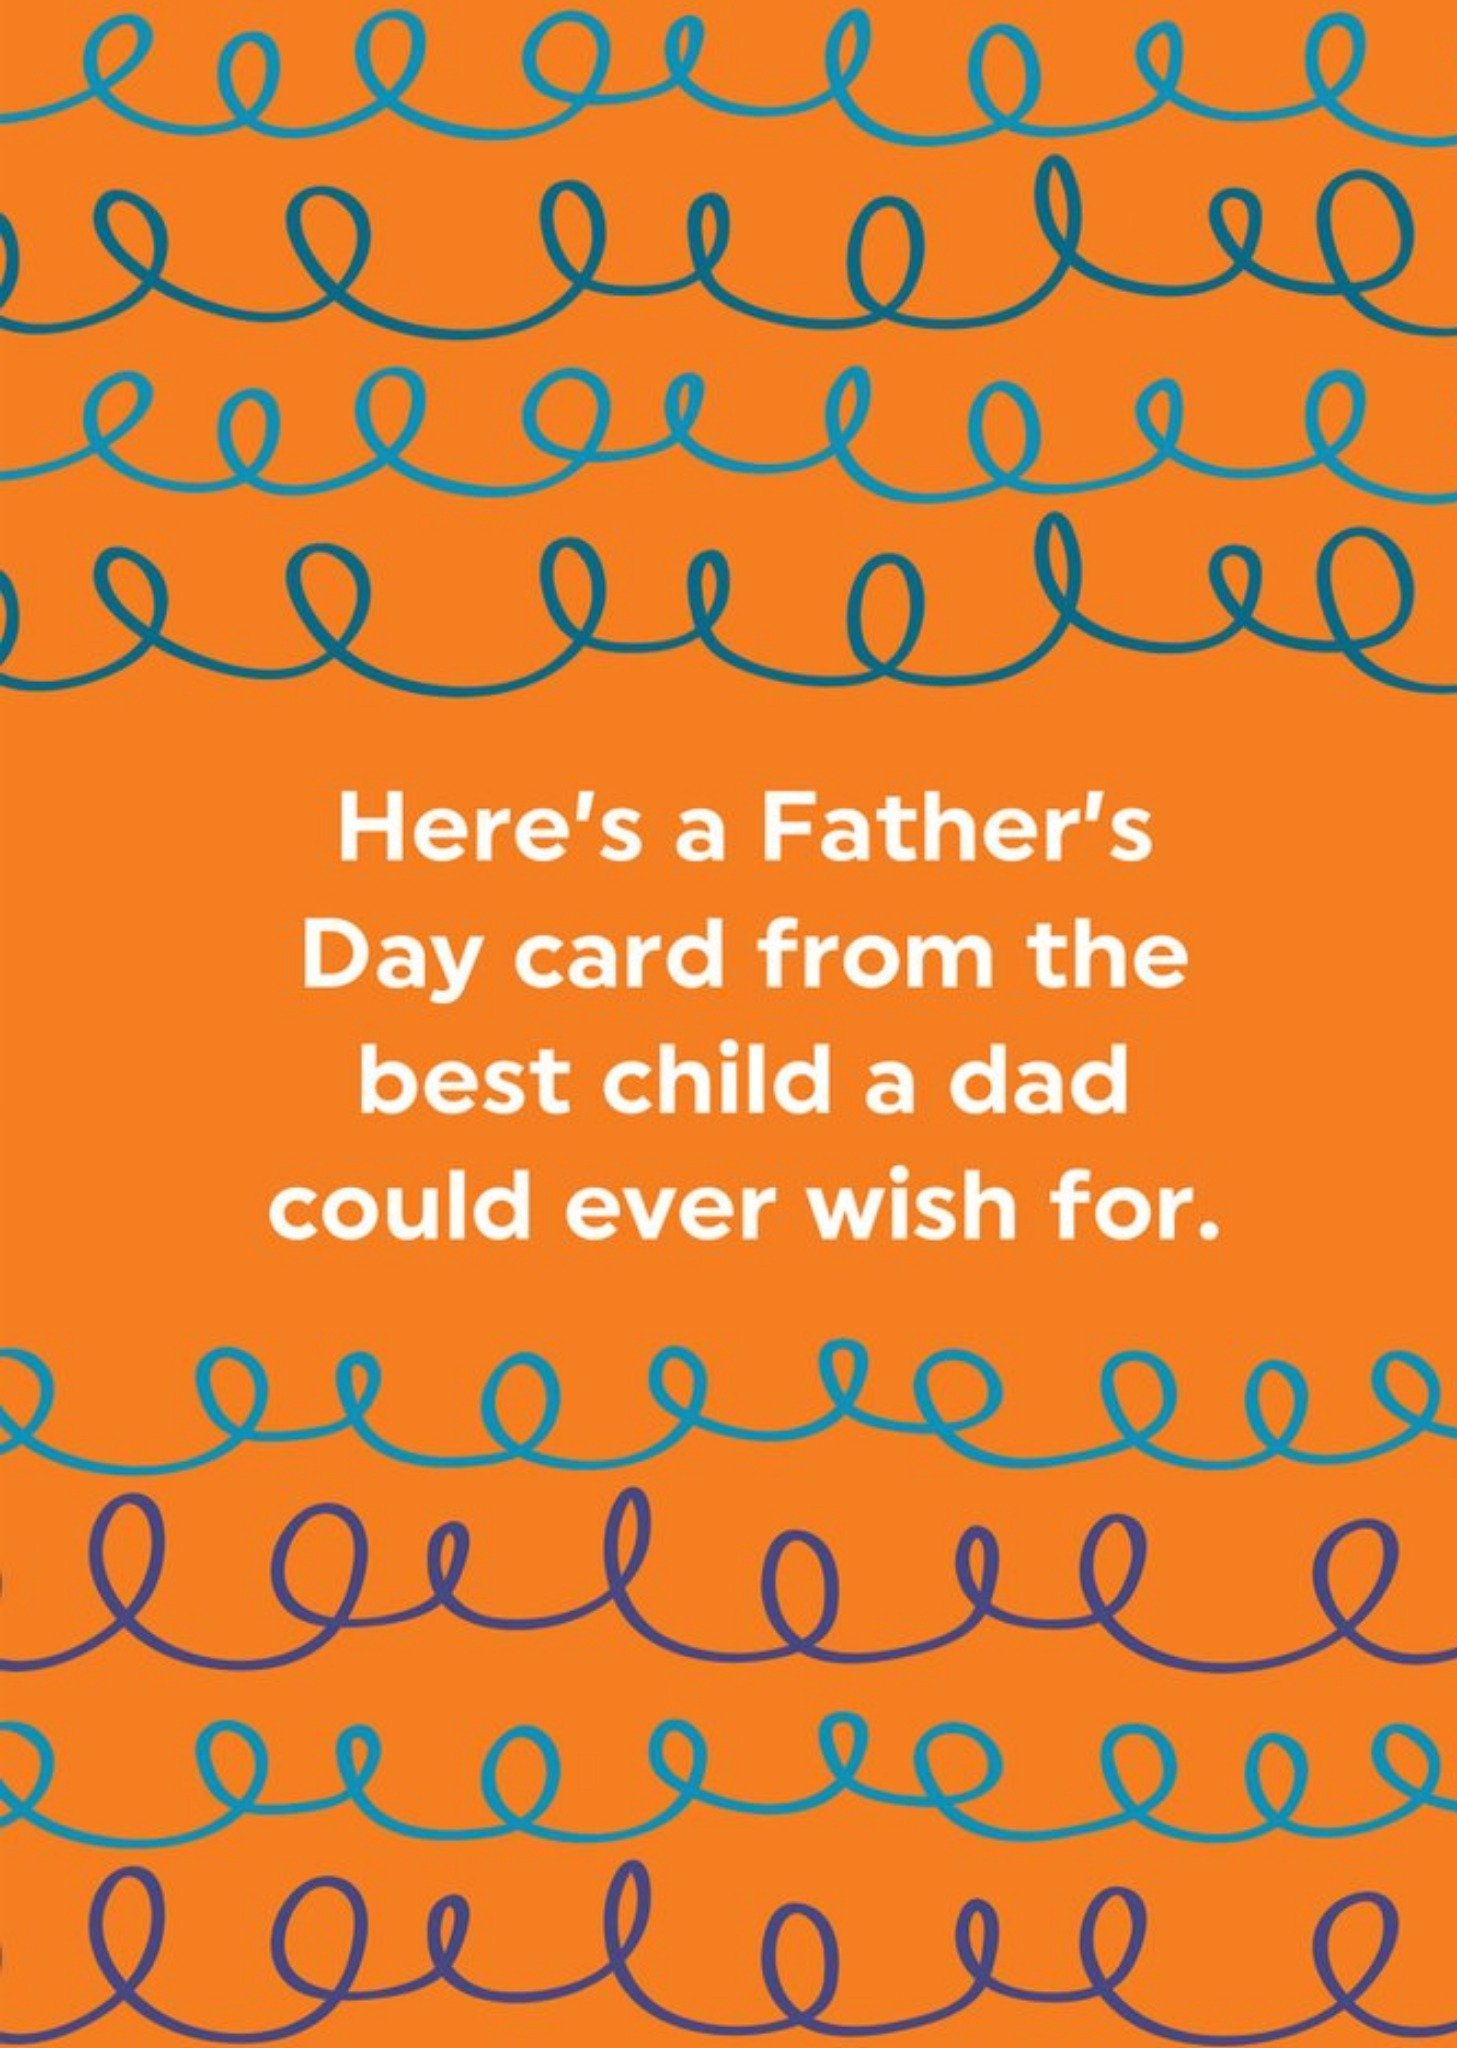 Moonpig Best Child A Dad Could Wish For Father's Day Card Ecard